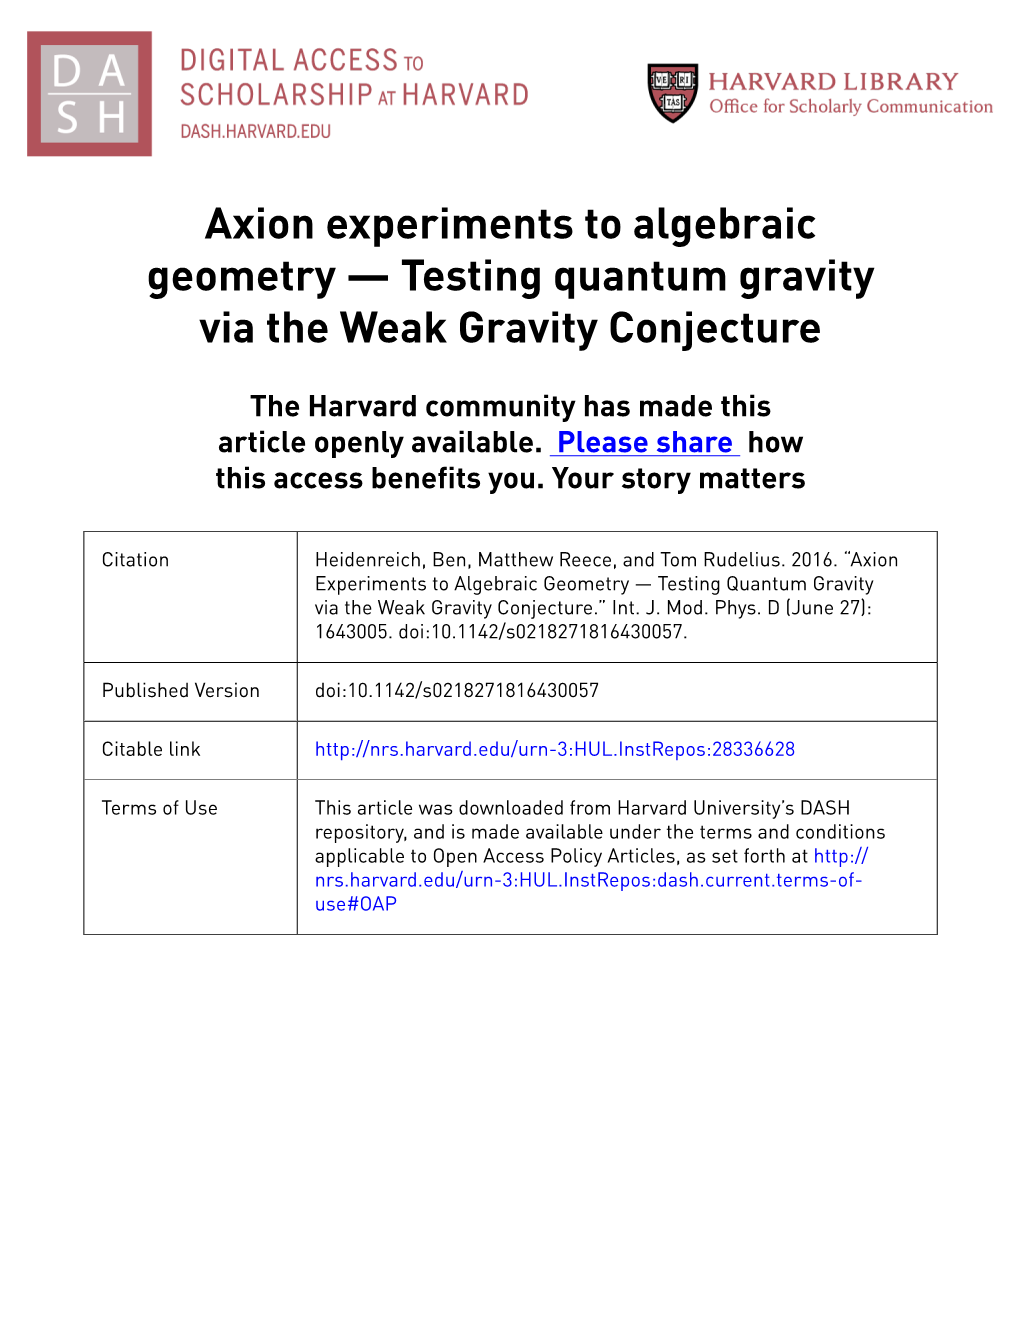 Axion Experiments to Algebraic Geometry — Testing Quantum Gravity Via the Weak Gravity Conjecture